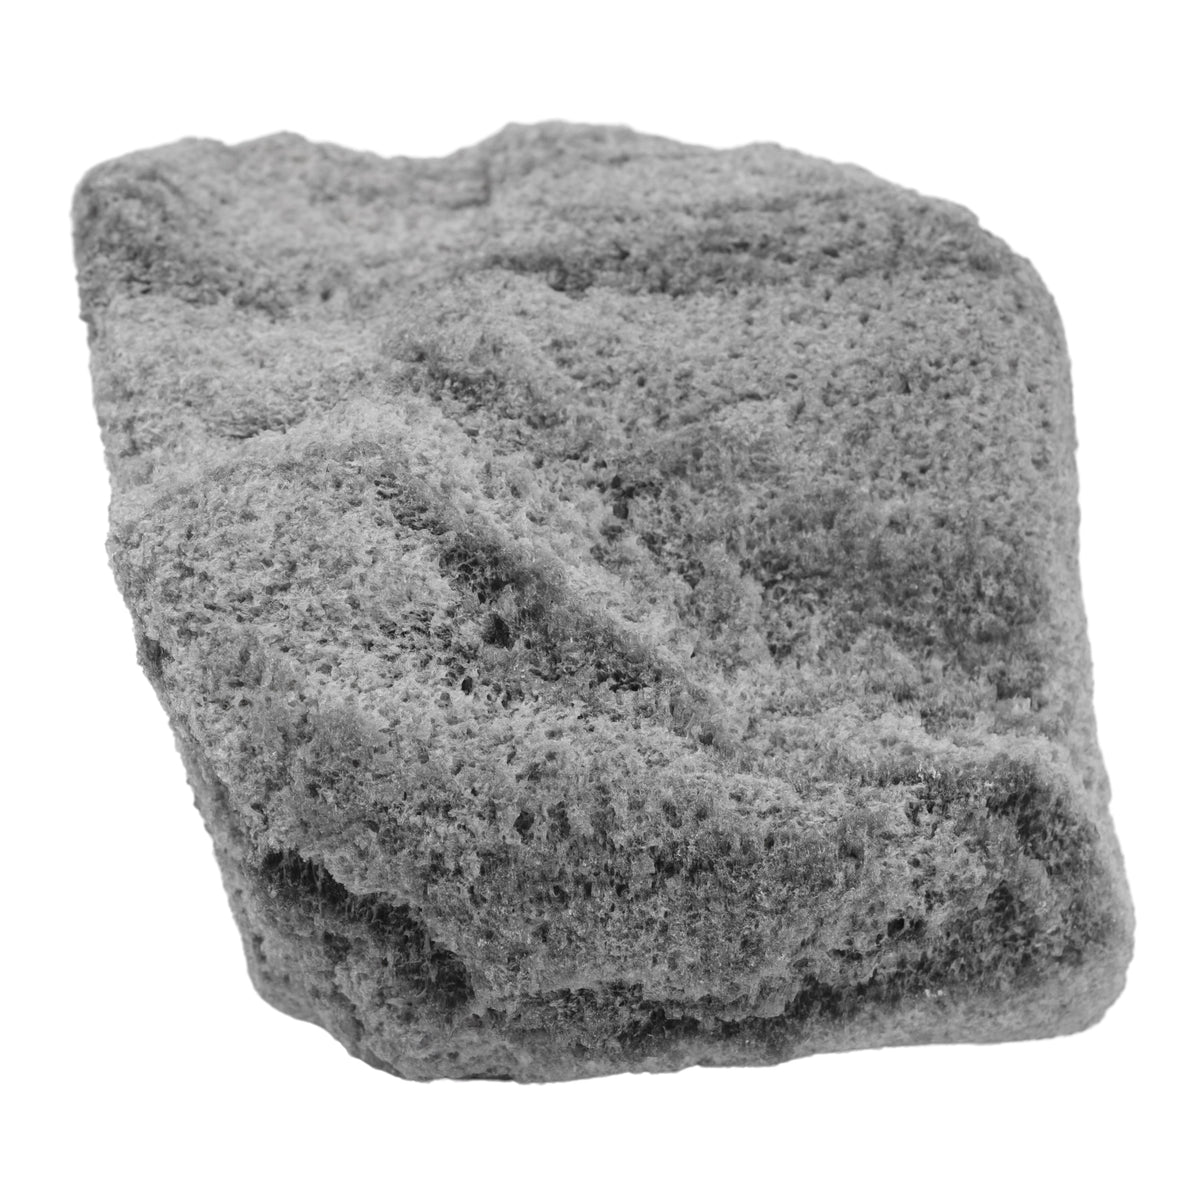 Raw Pumice, Igneous Rock Specimen - Hand Sample - Approx. 3 — Eisco Labs